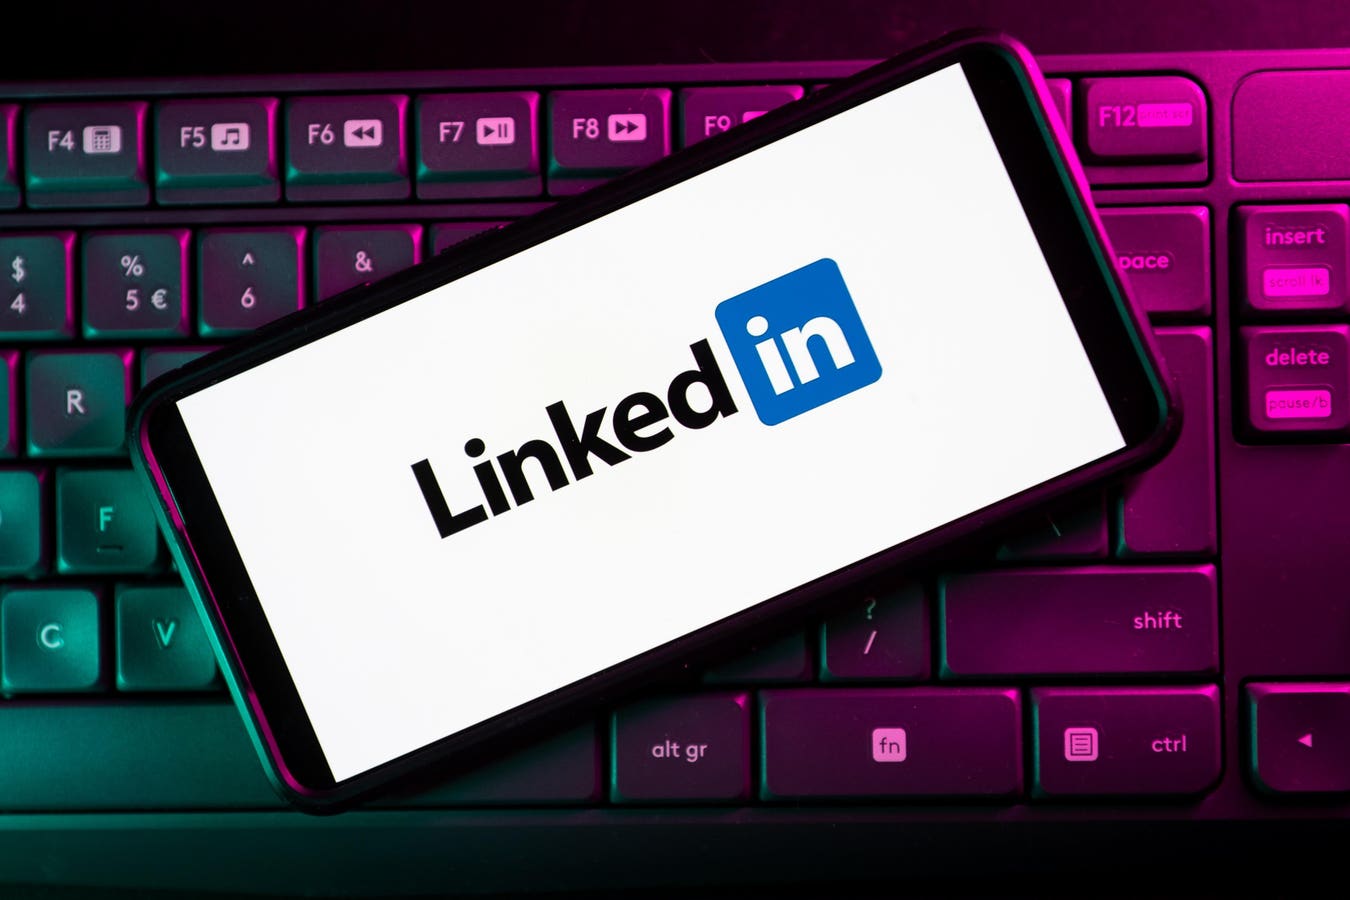 4 Must Watch LinkedIn Live Panels On Workplace Mental Health